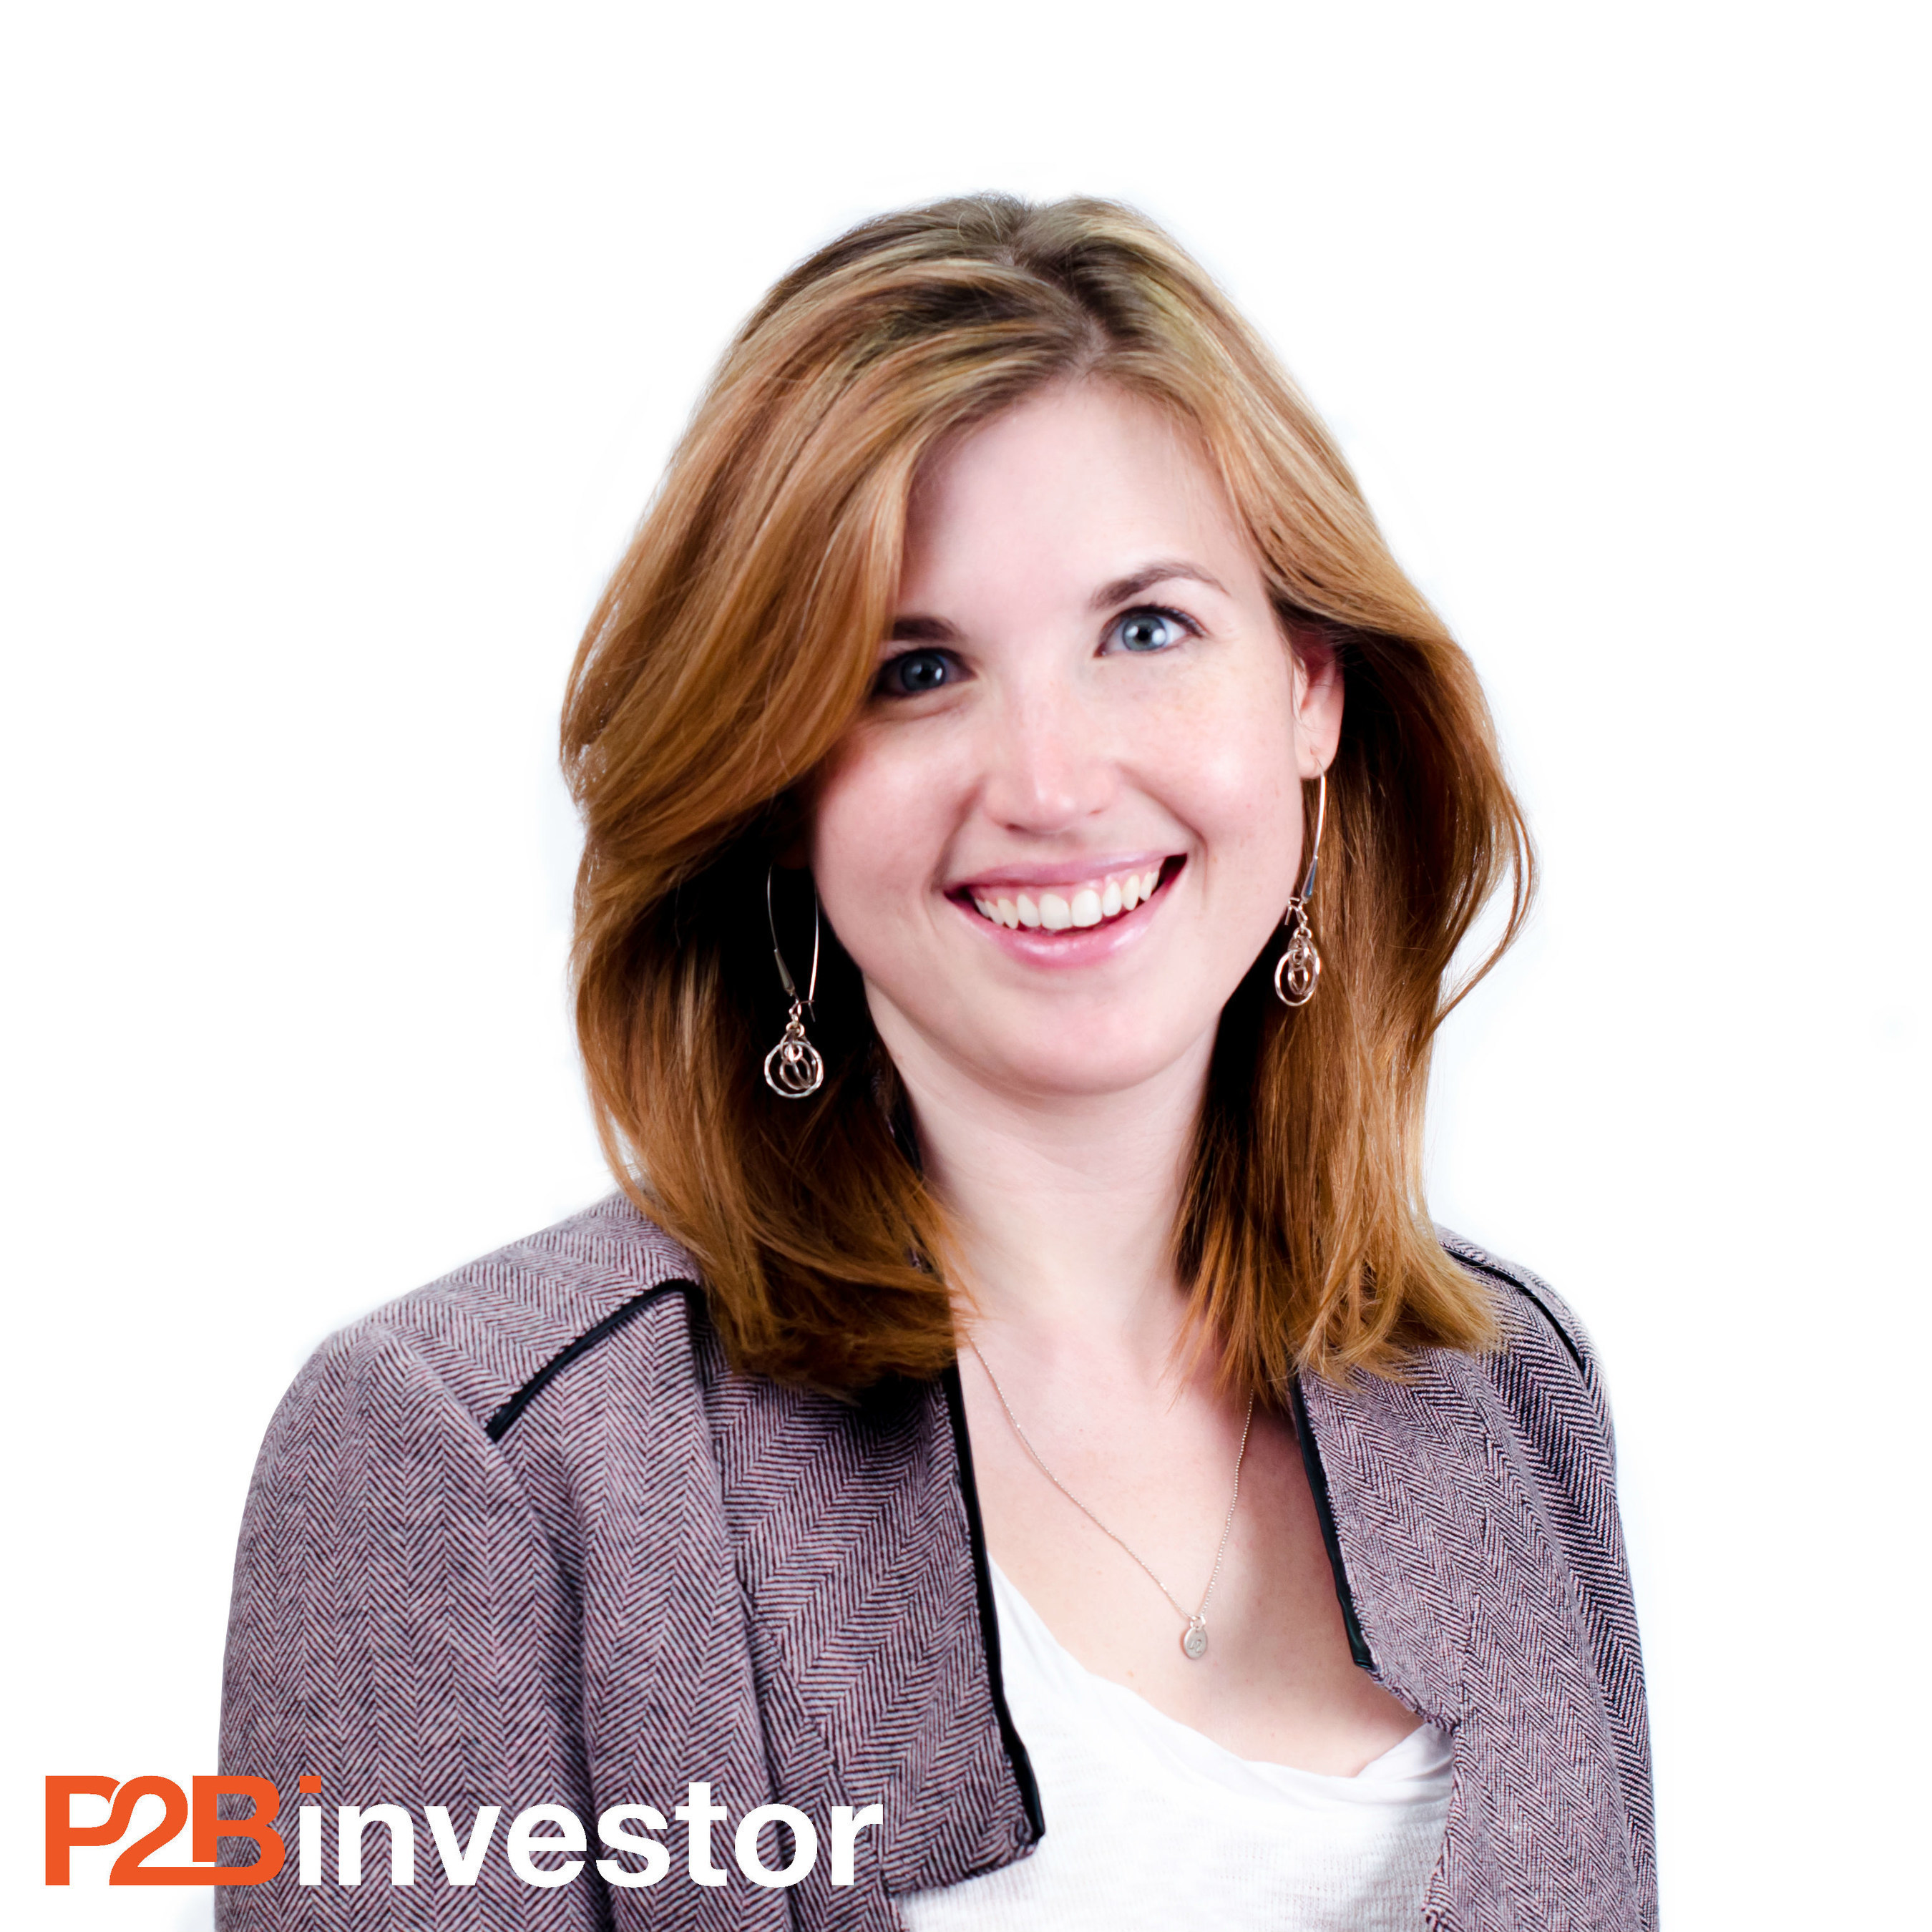 Krista Morgan, CEO of P2Bi, a leading marketplace lender for commercial lines of credit. In just 18 months she has led the company to fund over $110 million to its small and medium-sized business borrowers.